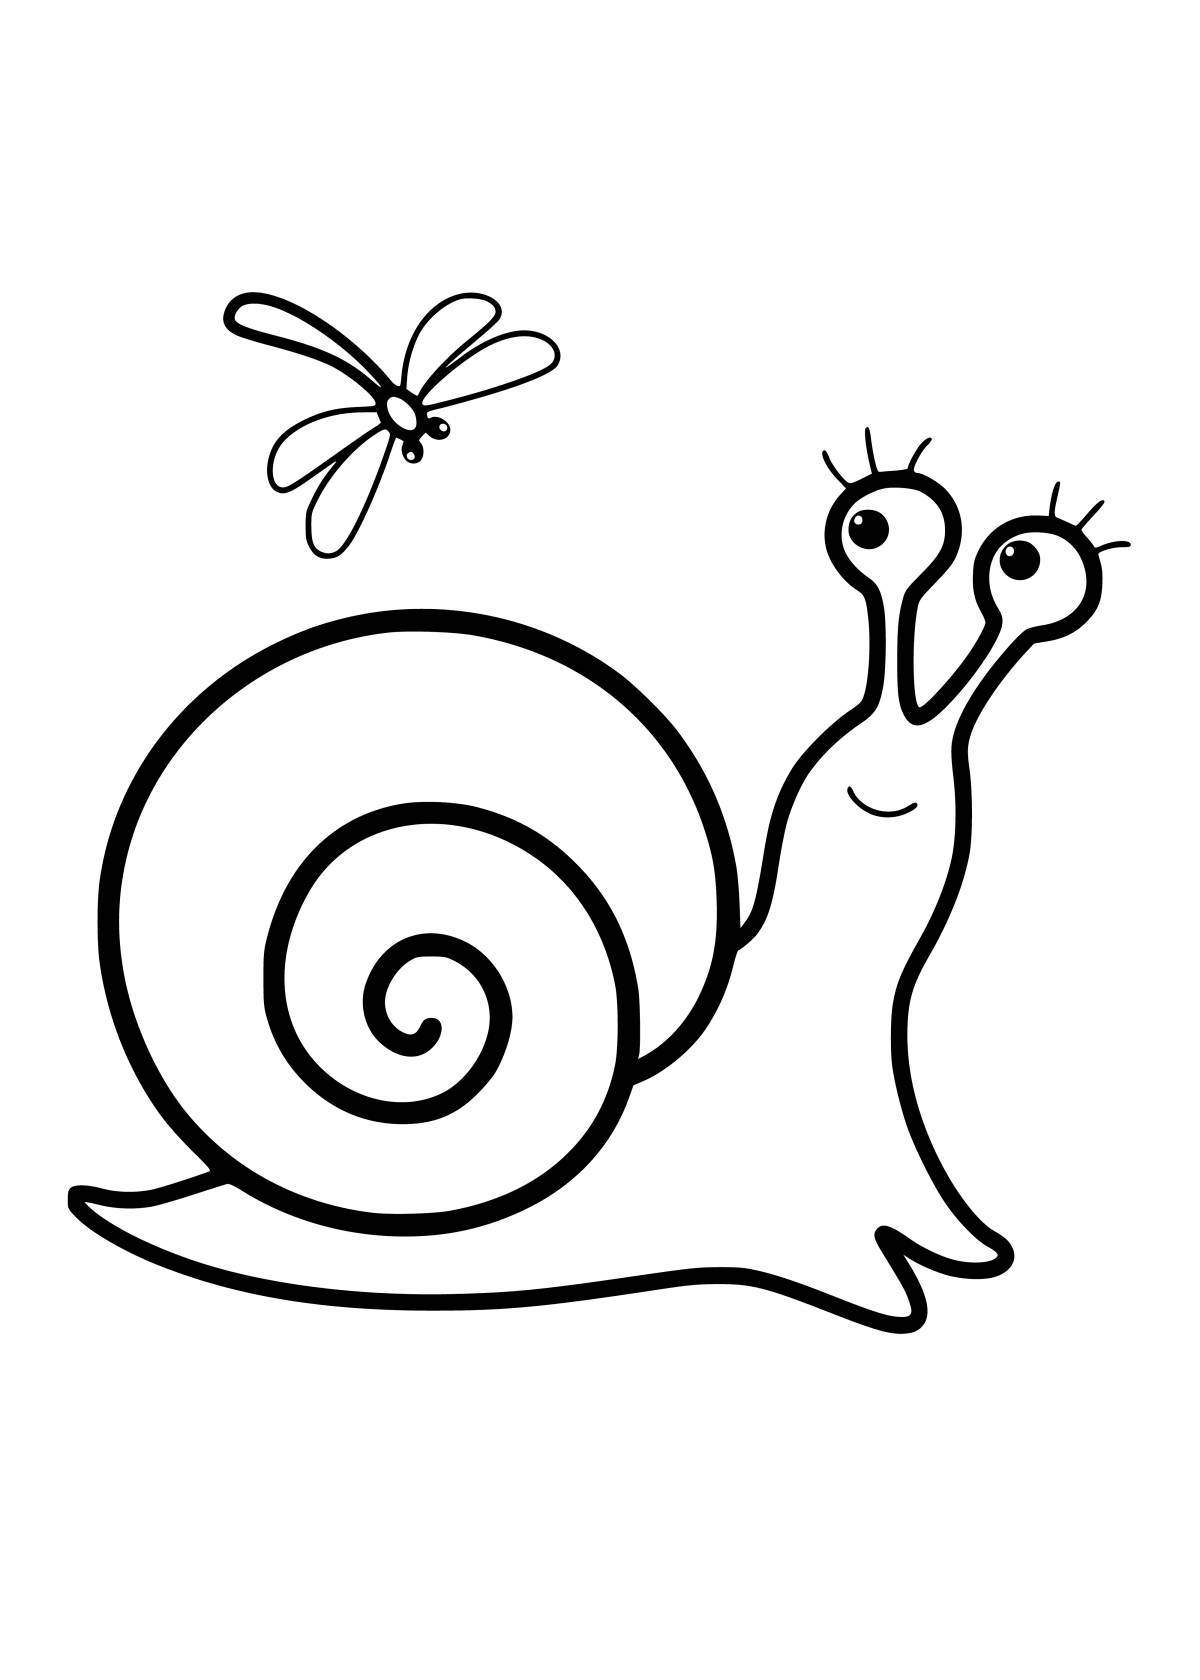 Cute snails coloring pages for kids